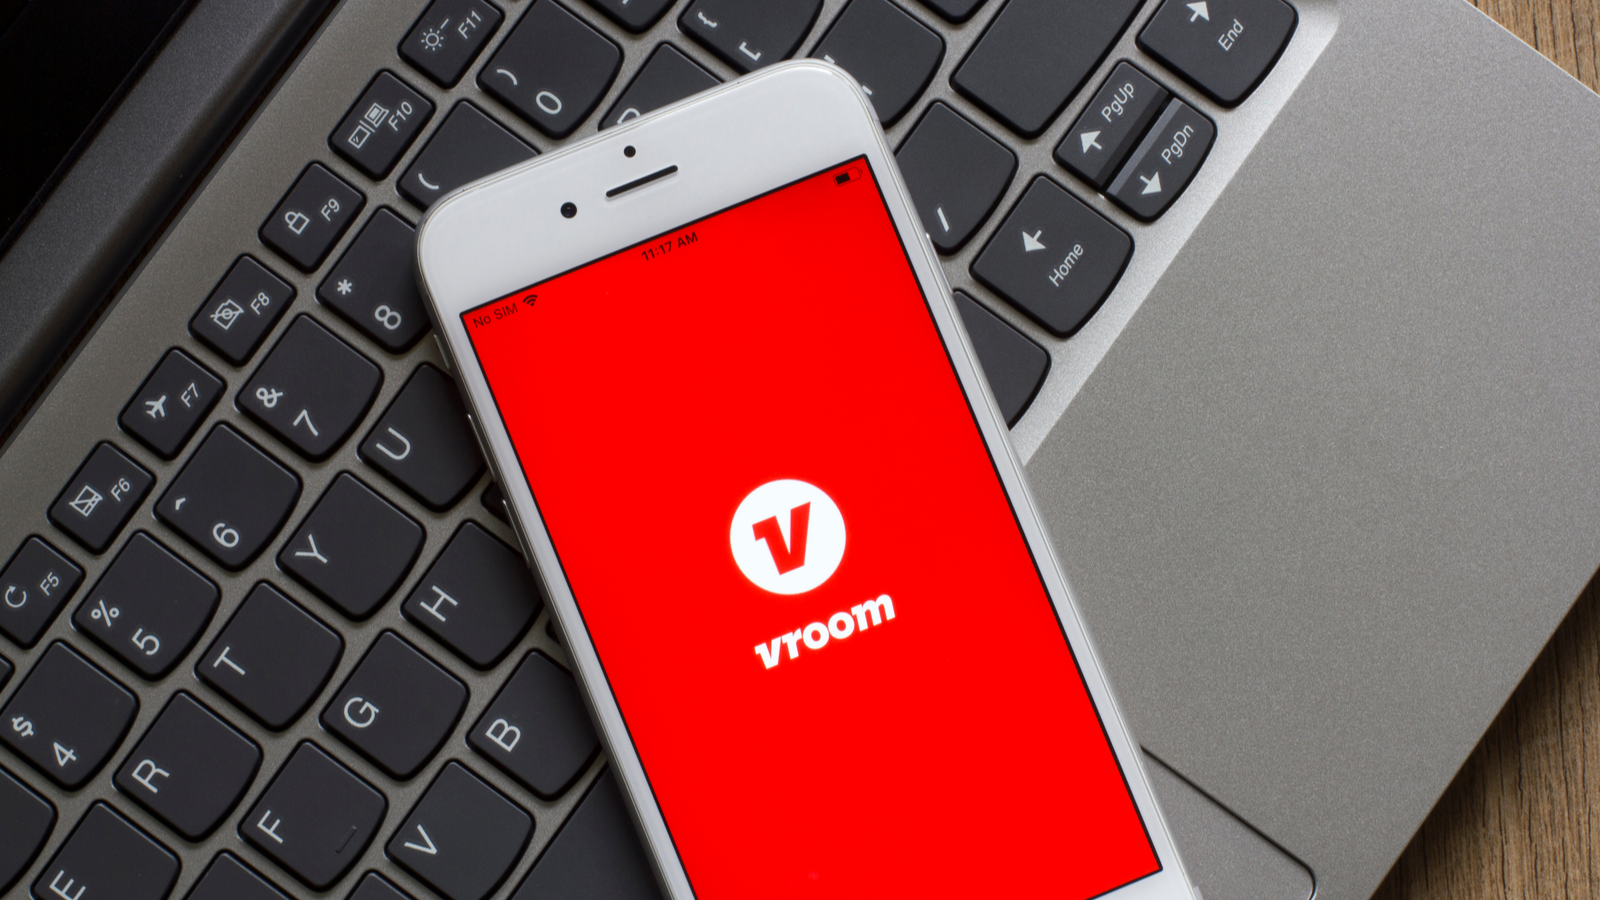 American on-demand car buying and selling startup Vroom's (VRM stock) mobile app welcome page is seen on a smartphone.